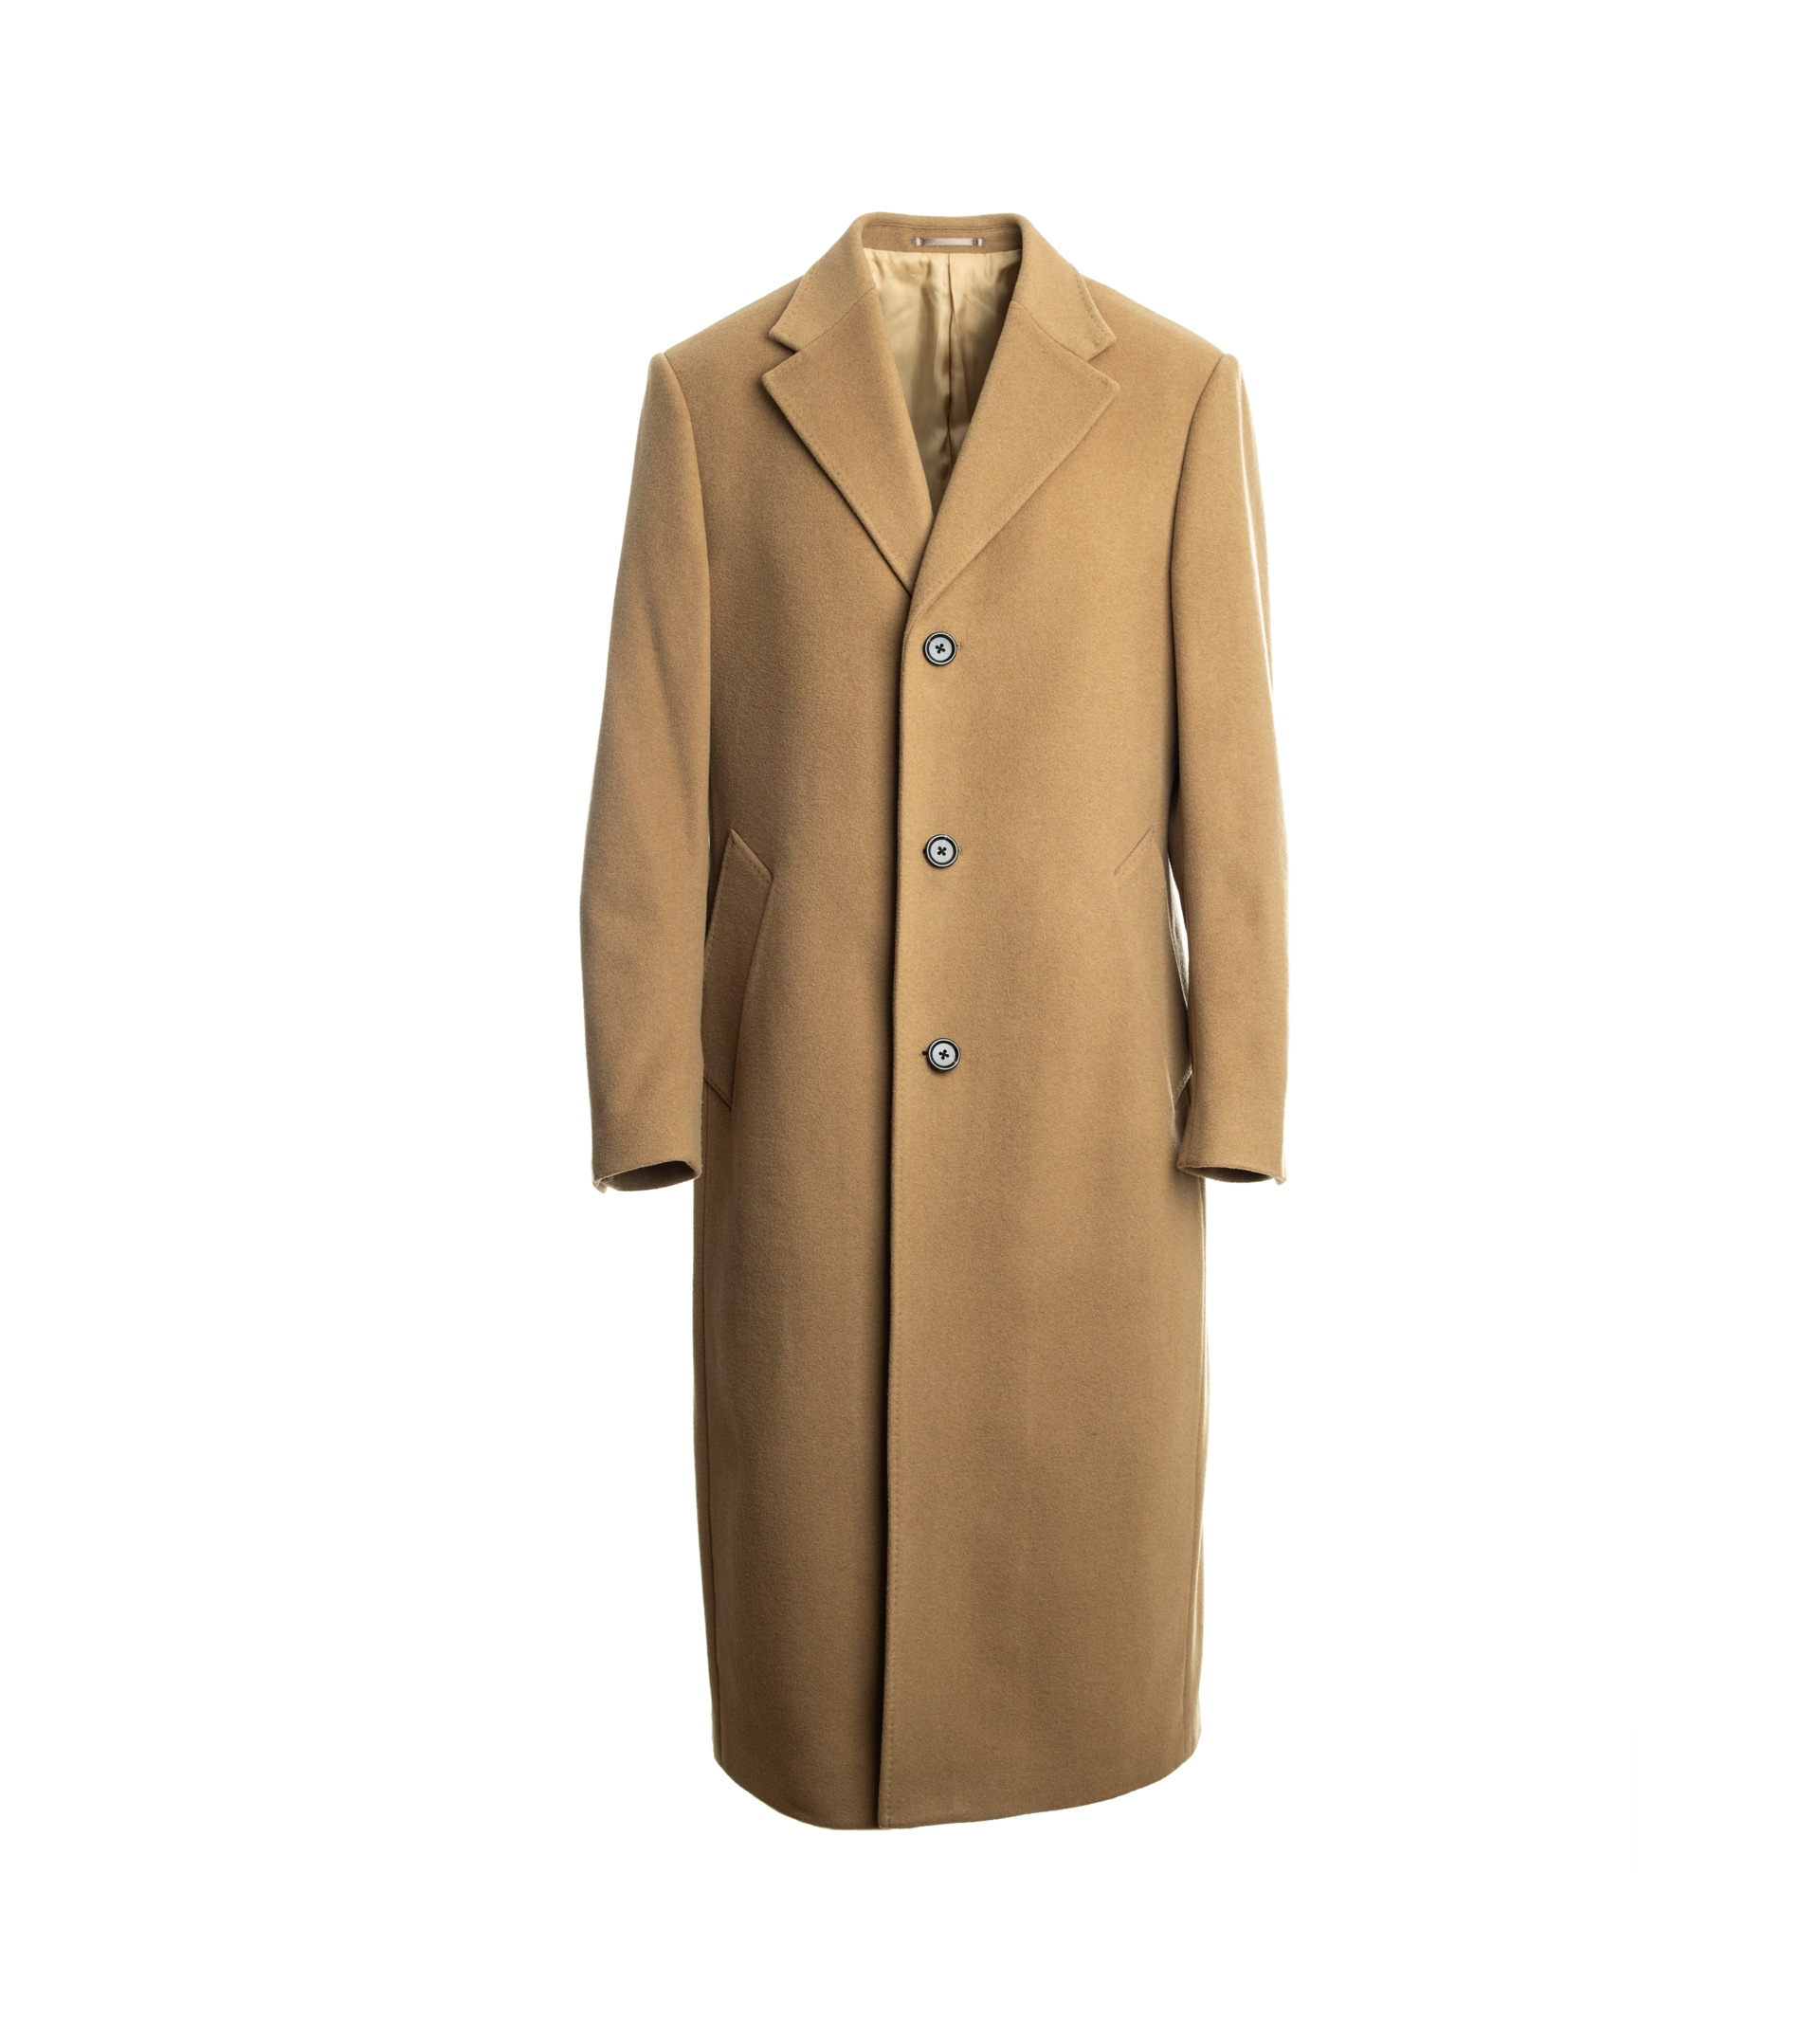 Camel Color Wool/Cashmere Blend Overcoat | He Spoke Style